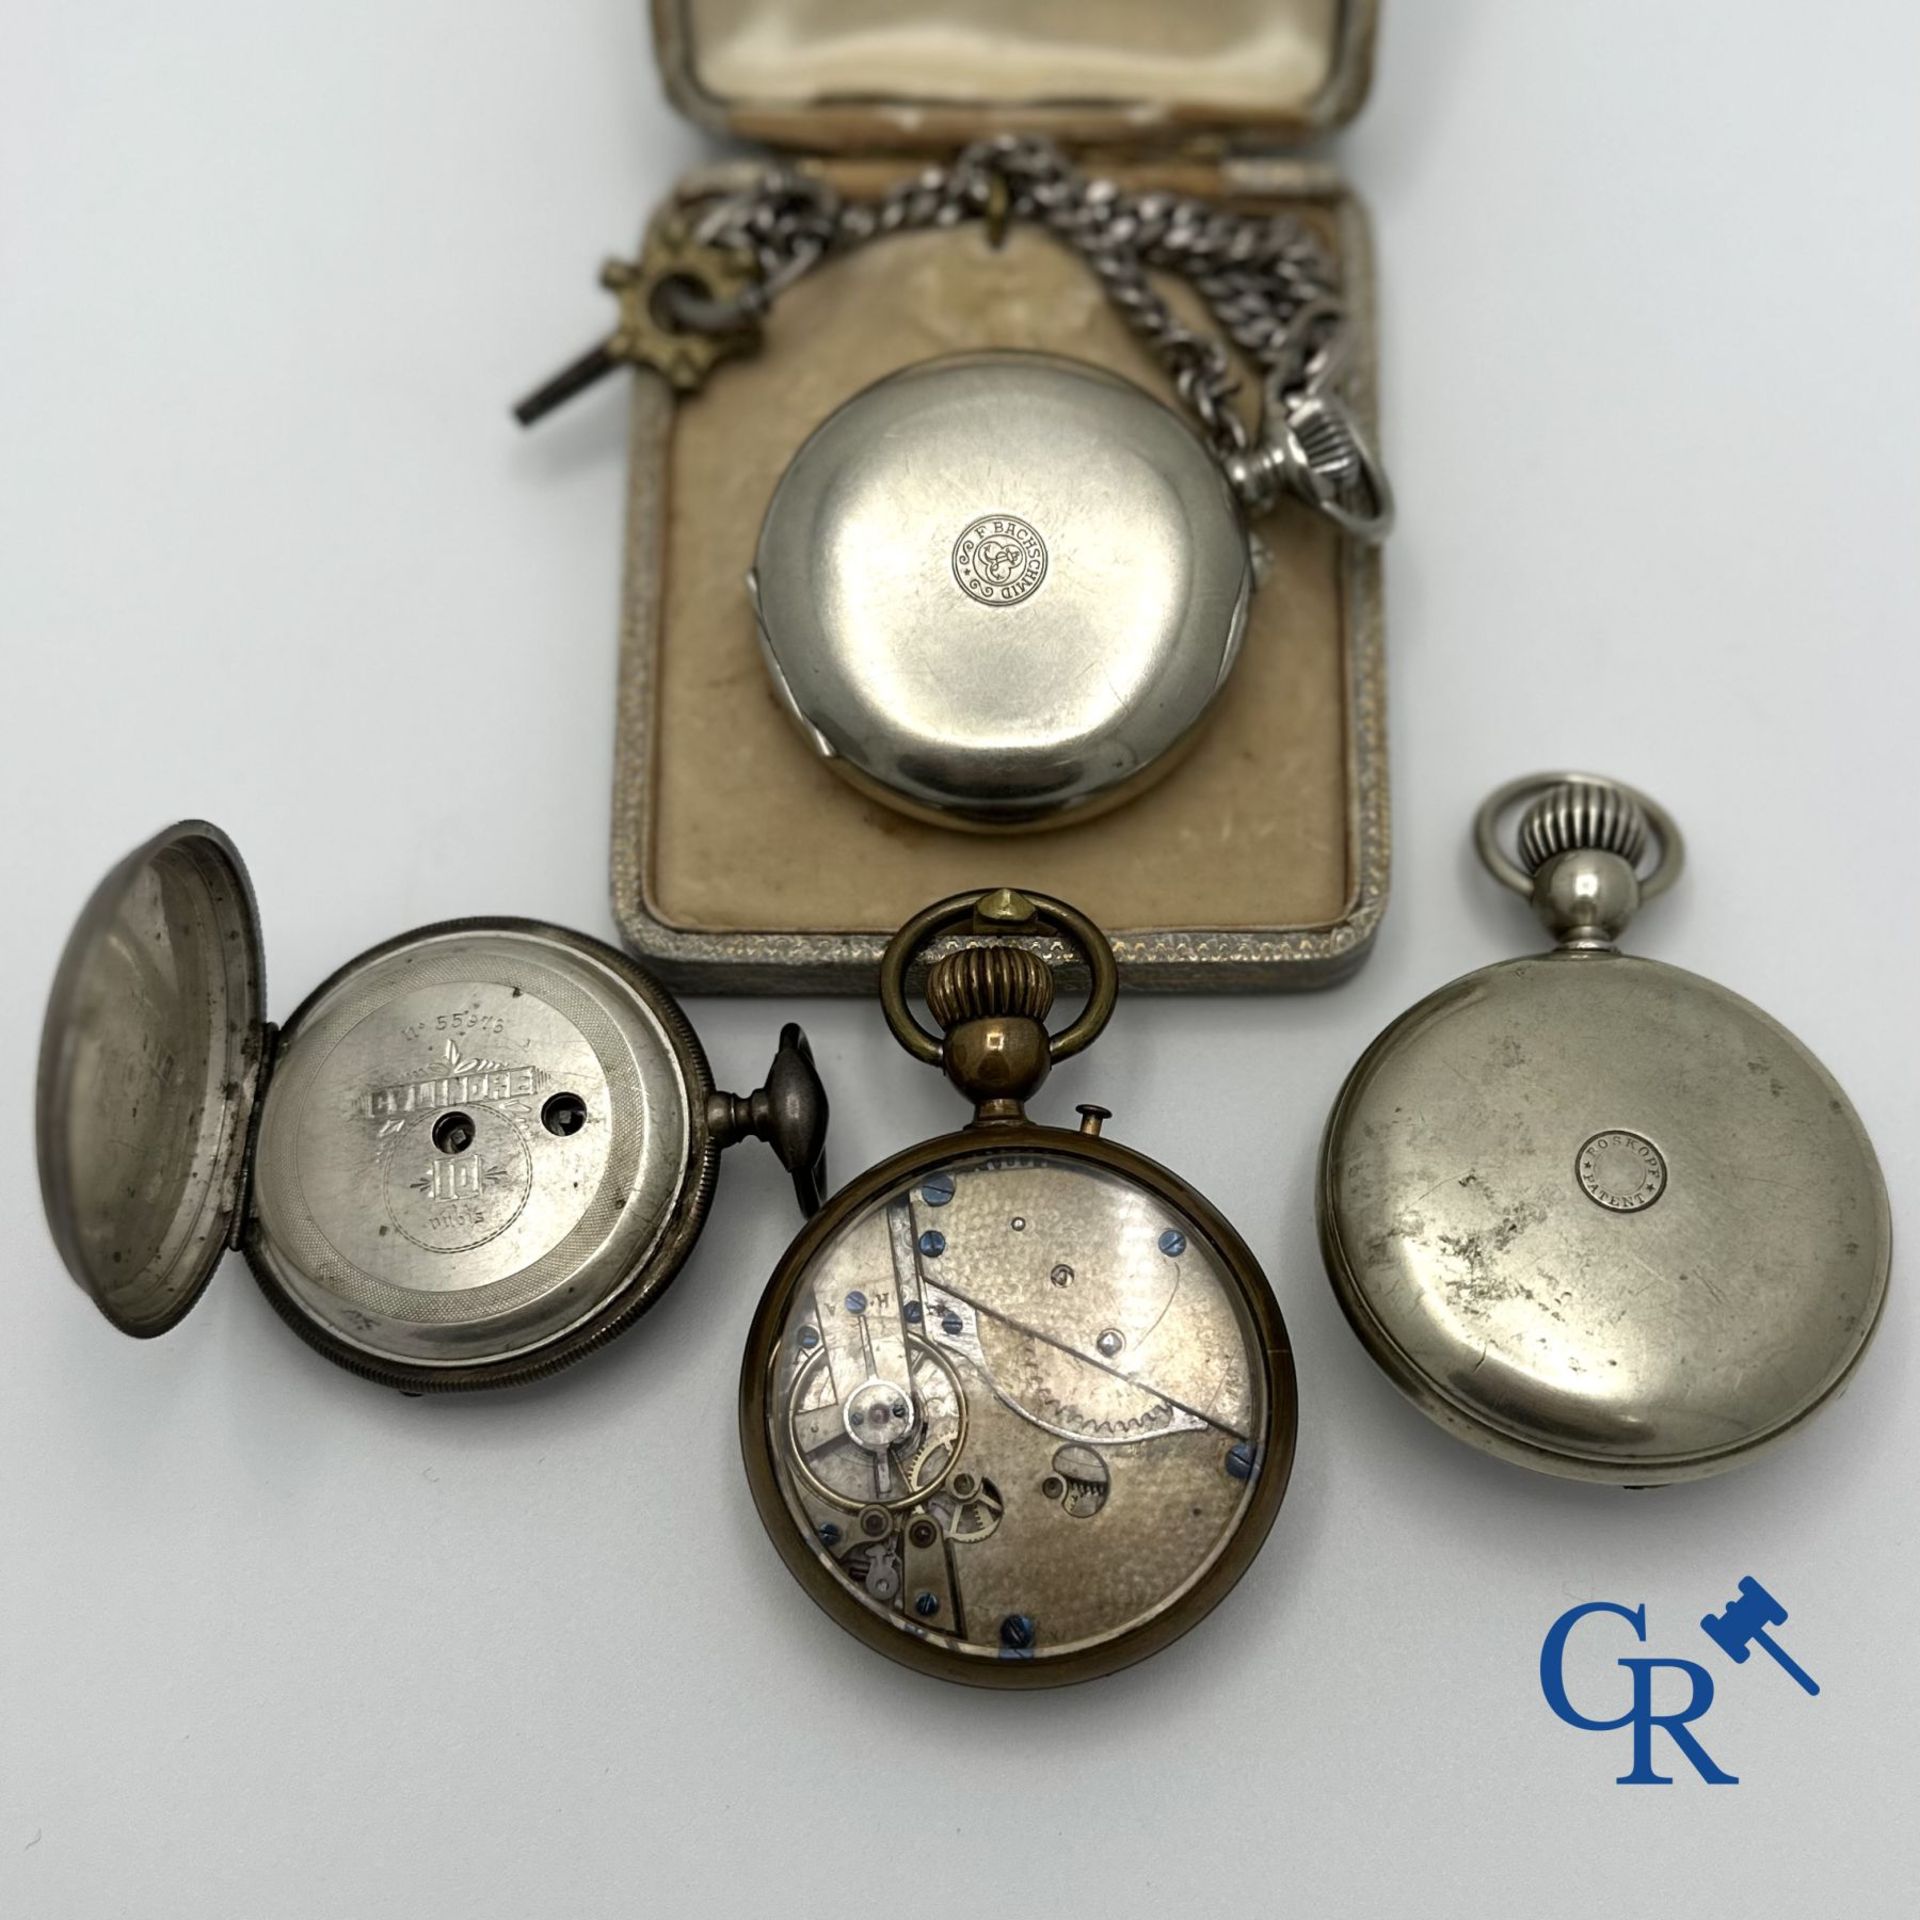 Watches: Lot of 4 old pocket watches. - Image 3 of 4